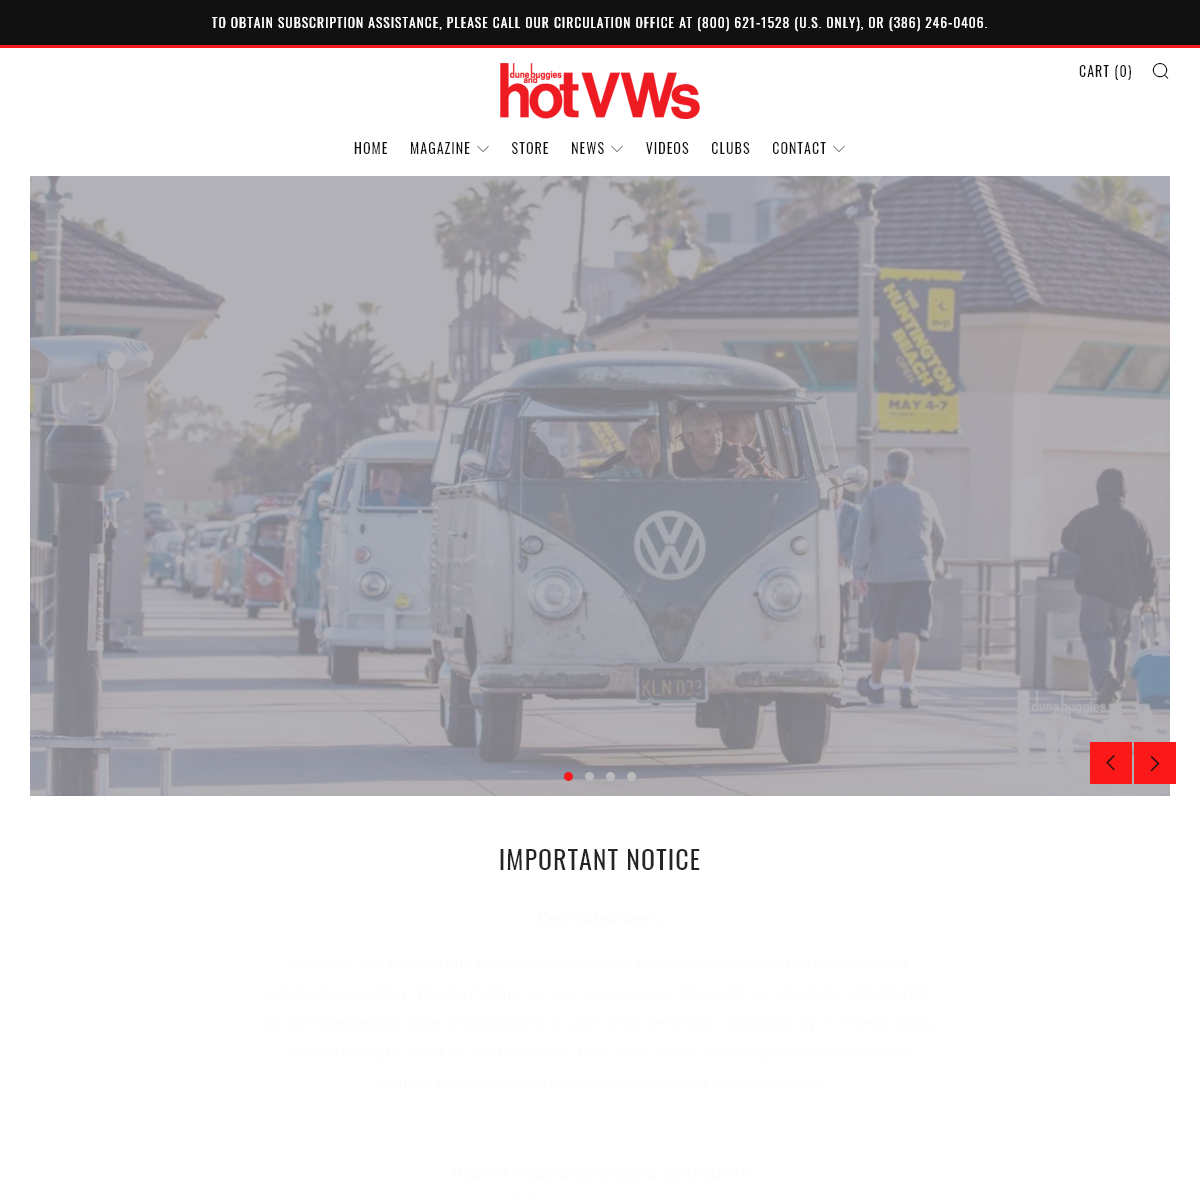 A complete backup of hotvws.com